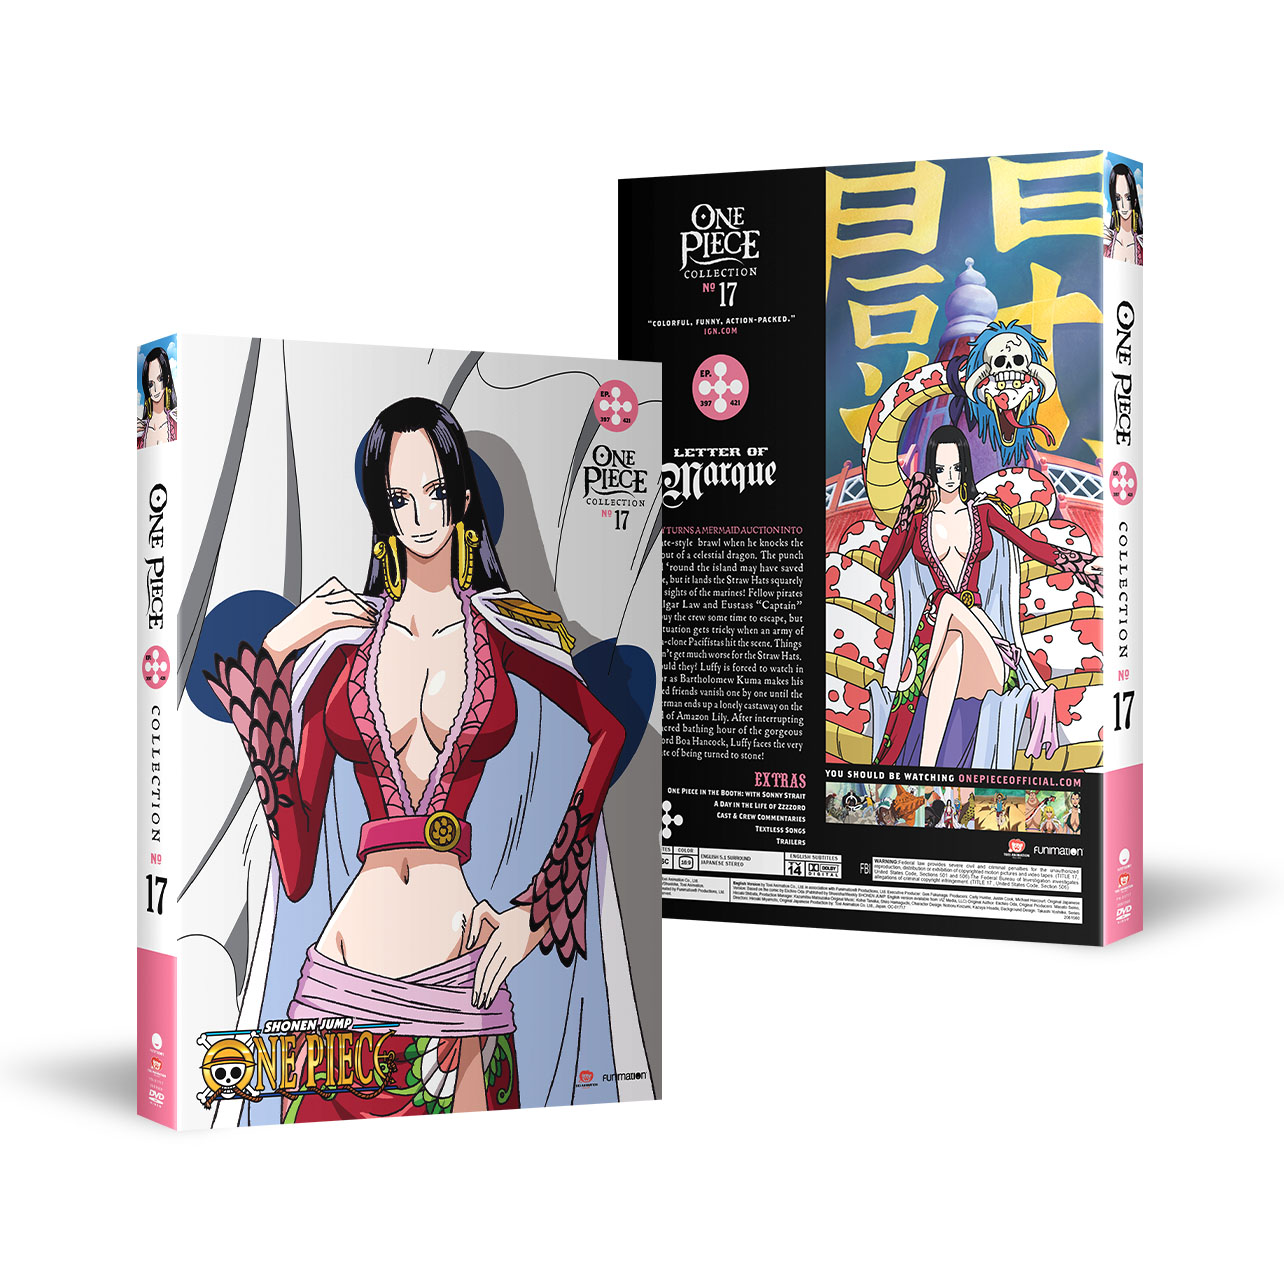 One Piece - Collection 17 - DVD image count 0